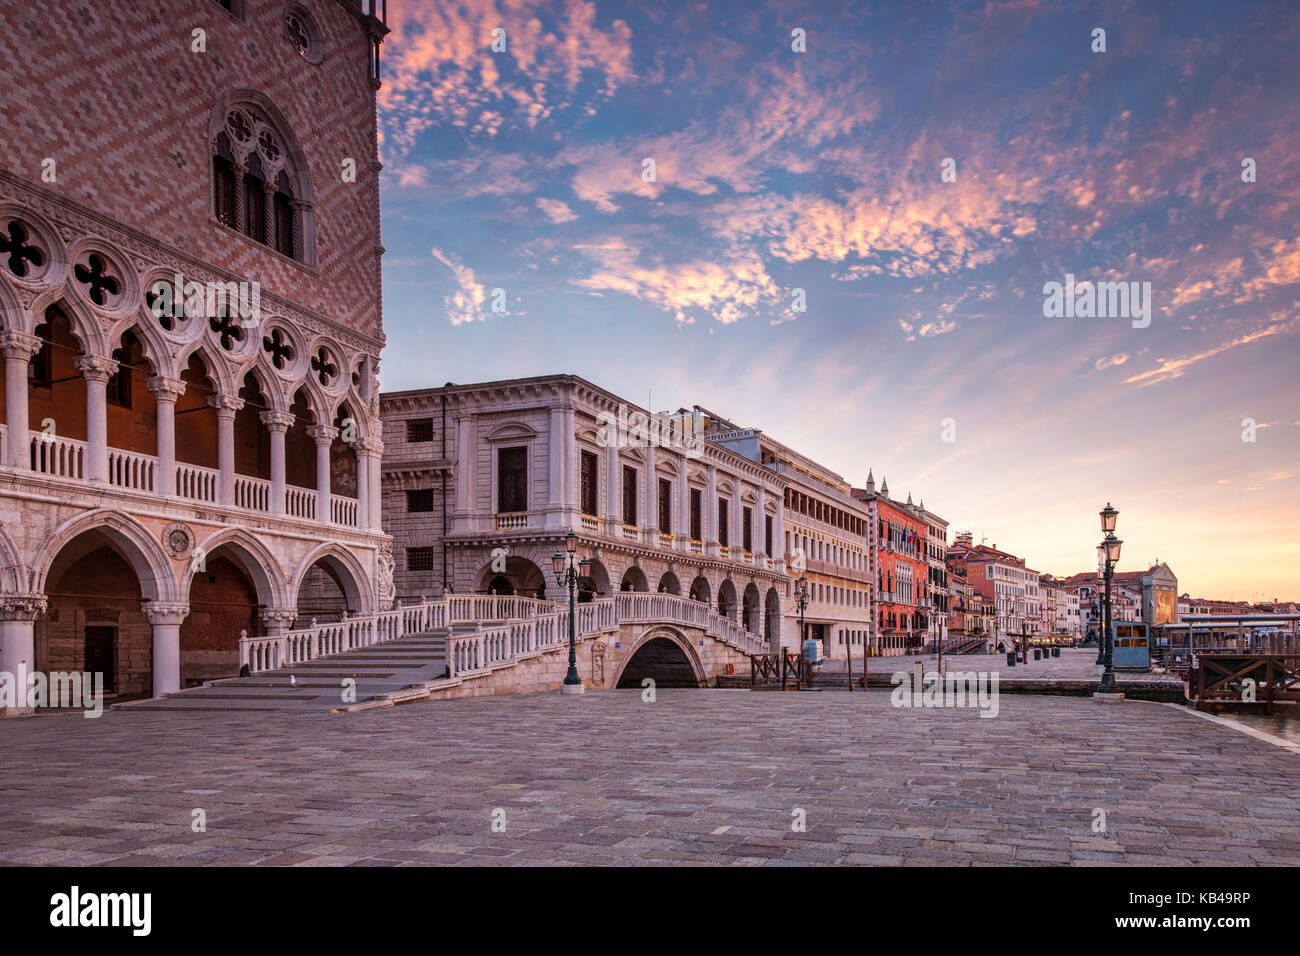 The promenade in front of the Doges Palace in Venice, Italy at sunrise Stock Photo